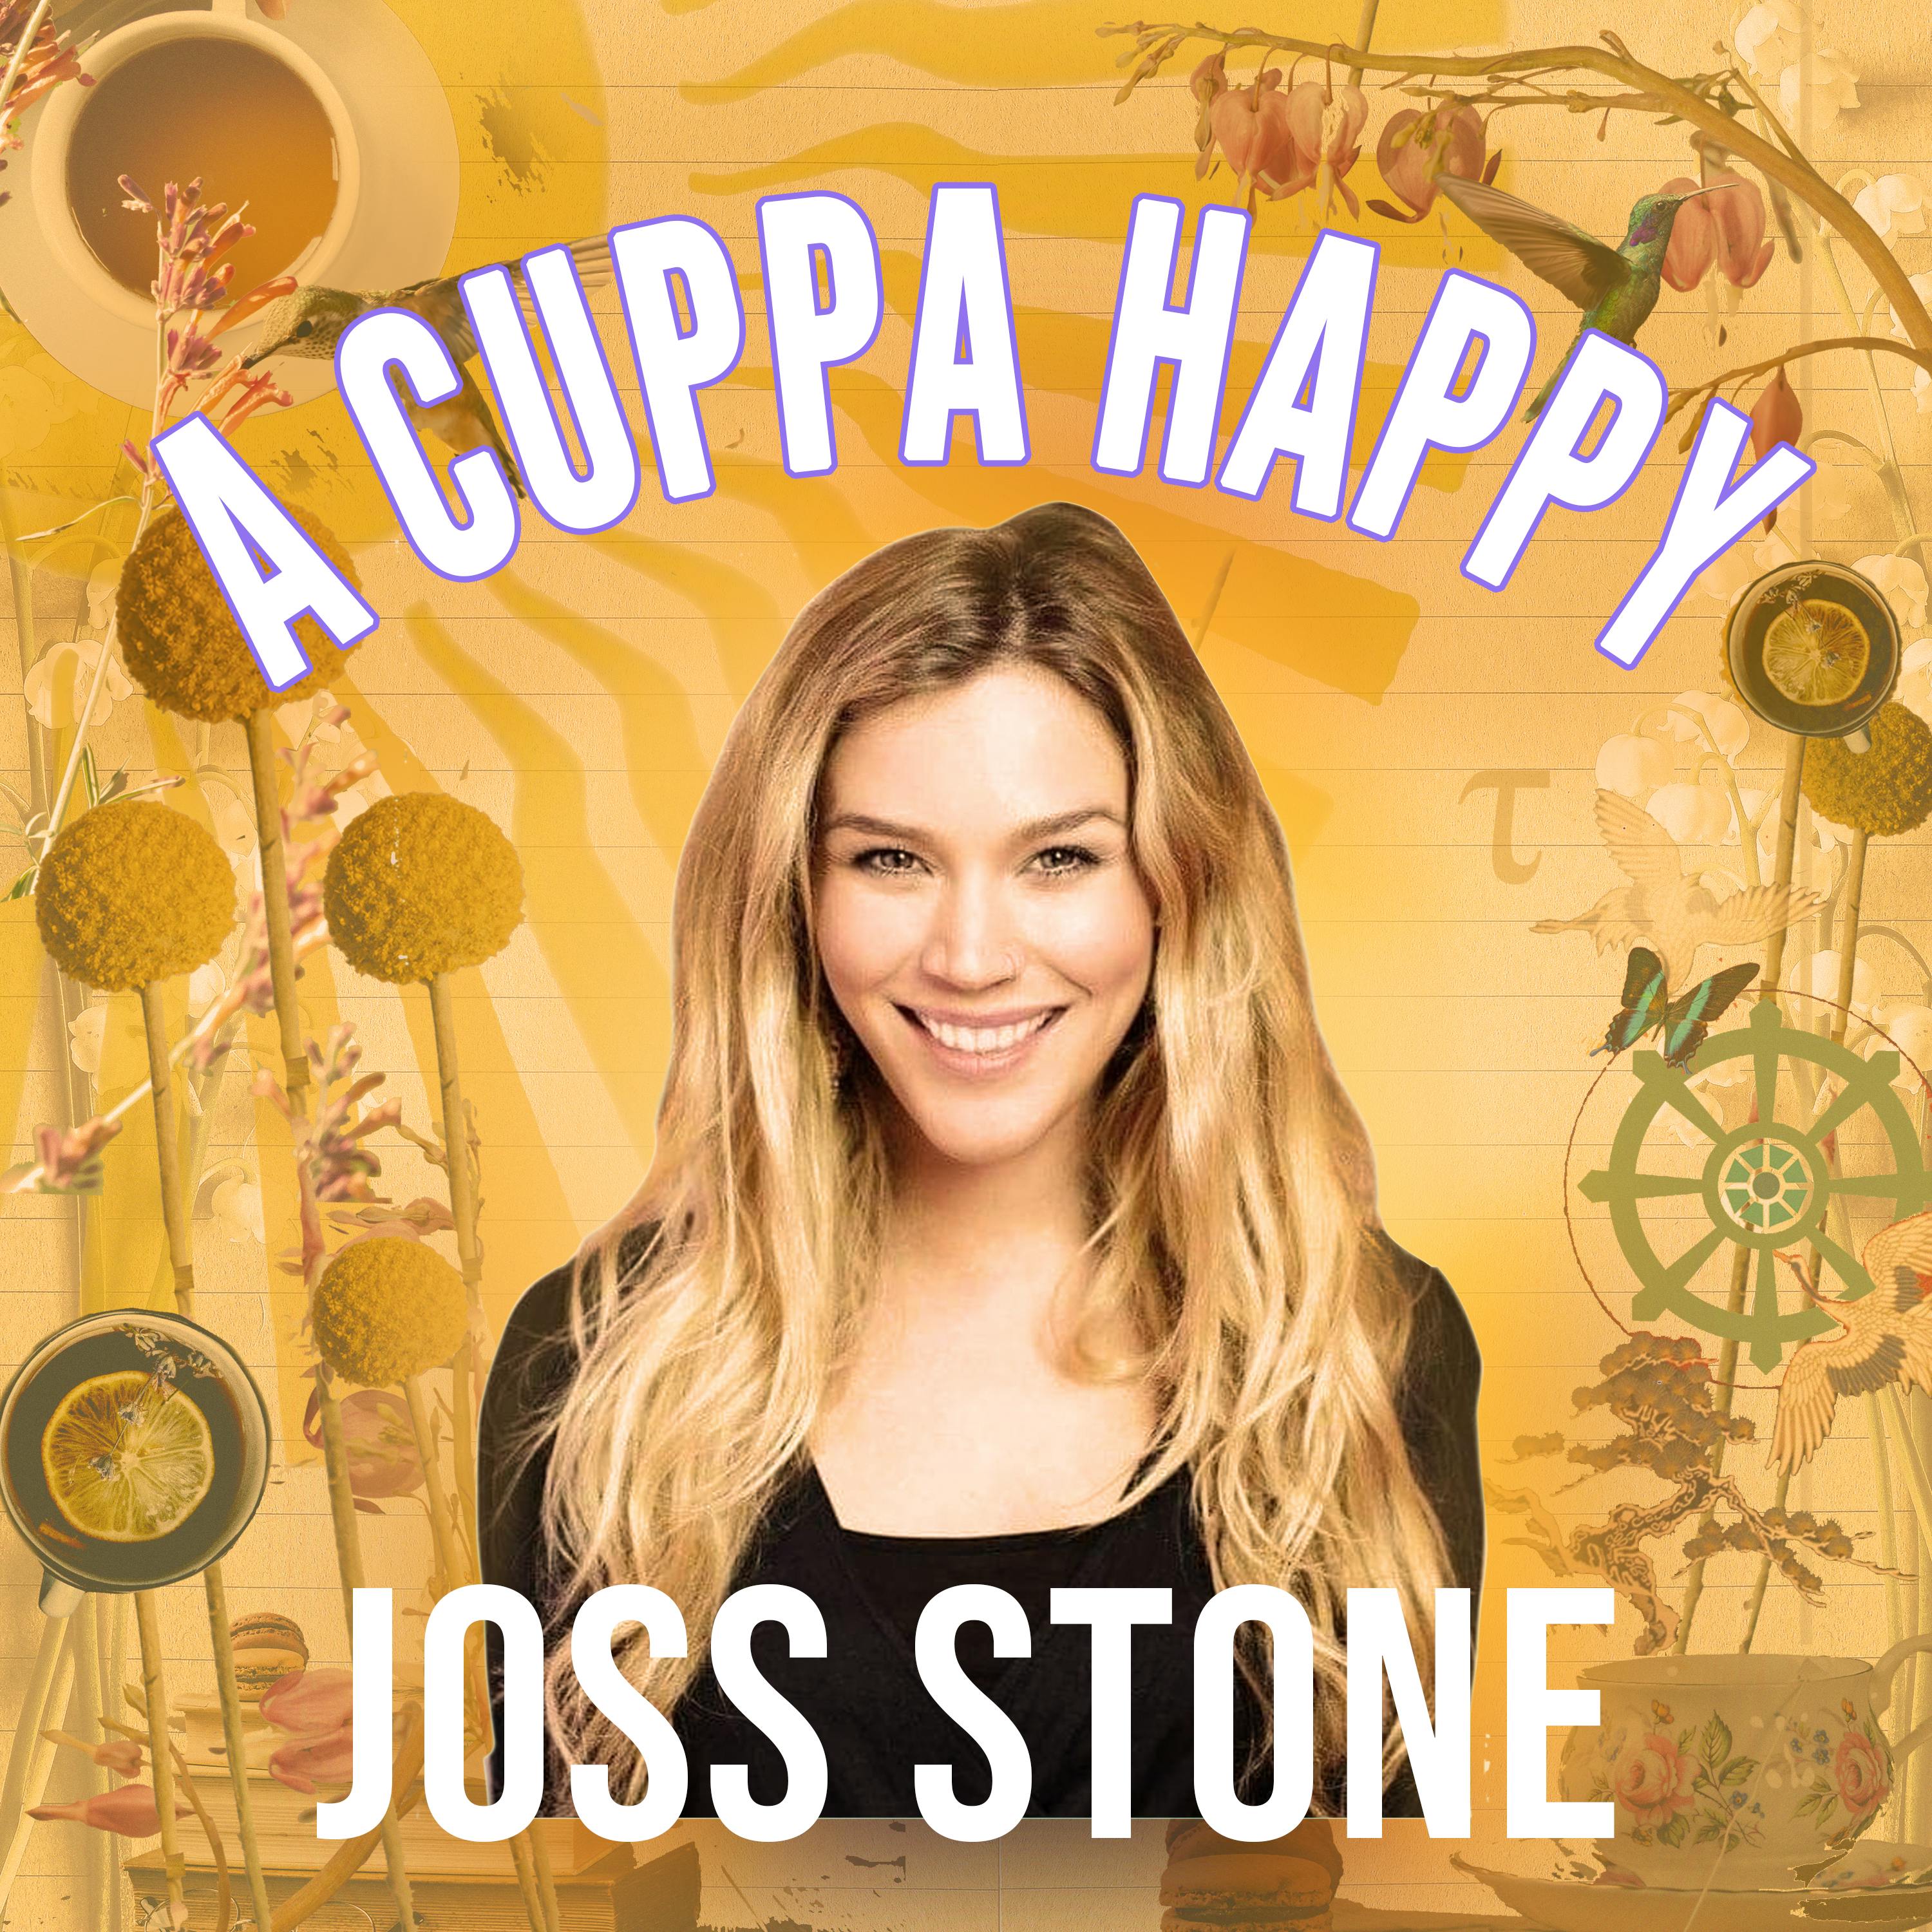 Introducing Joss Stone's A Cuppa Happy